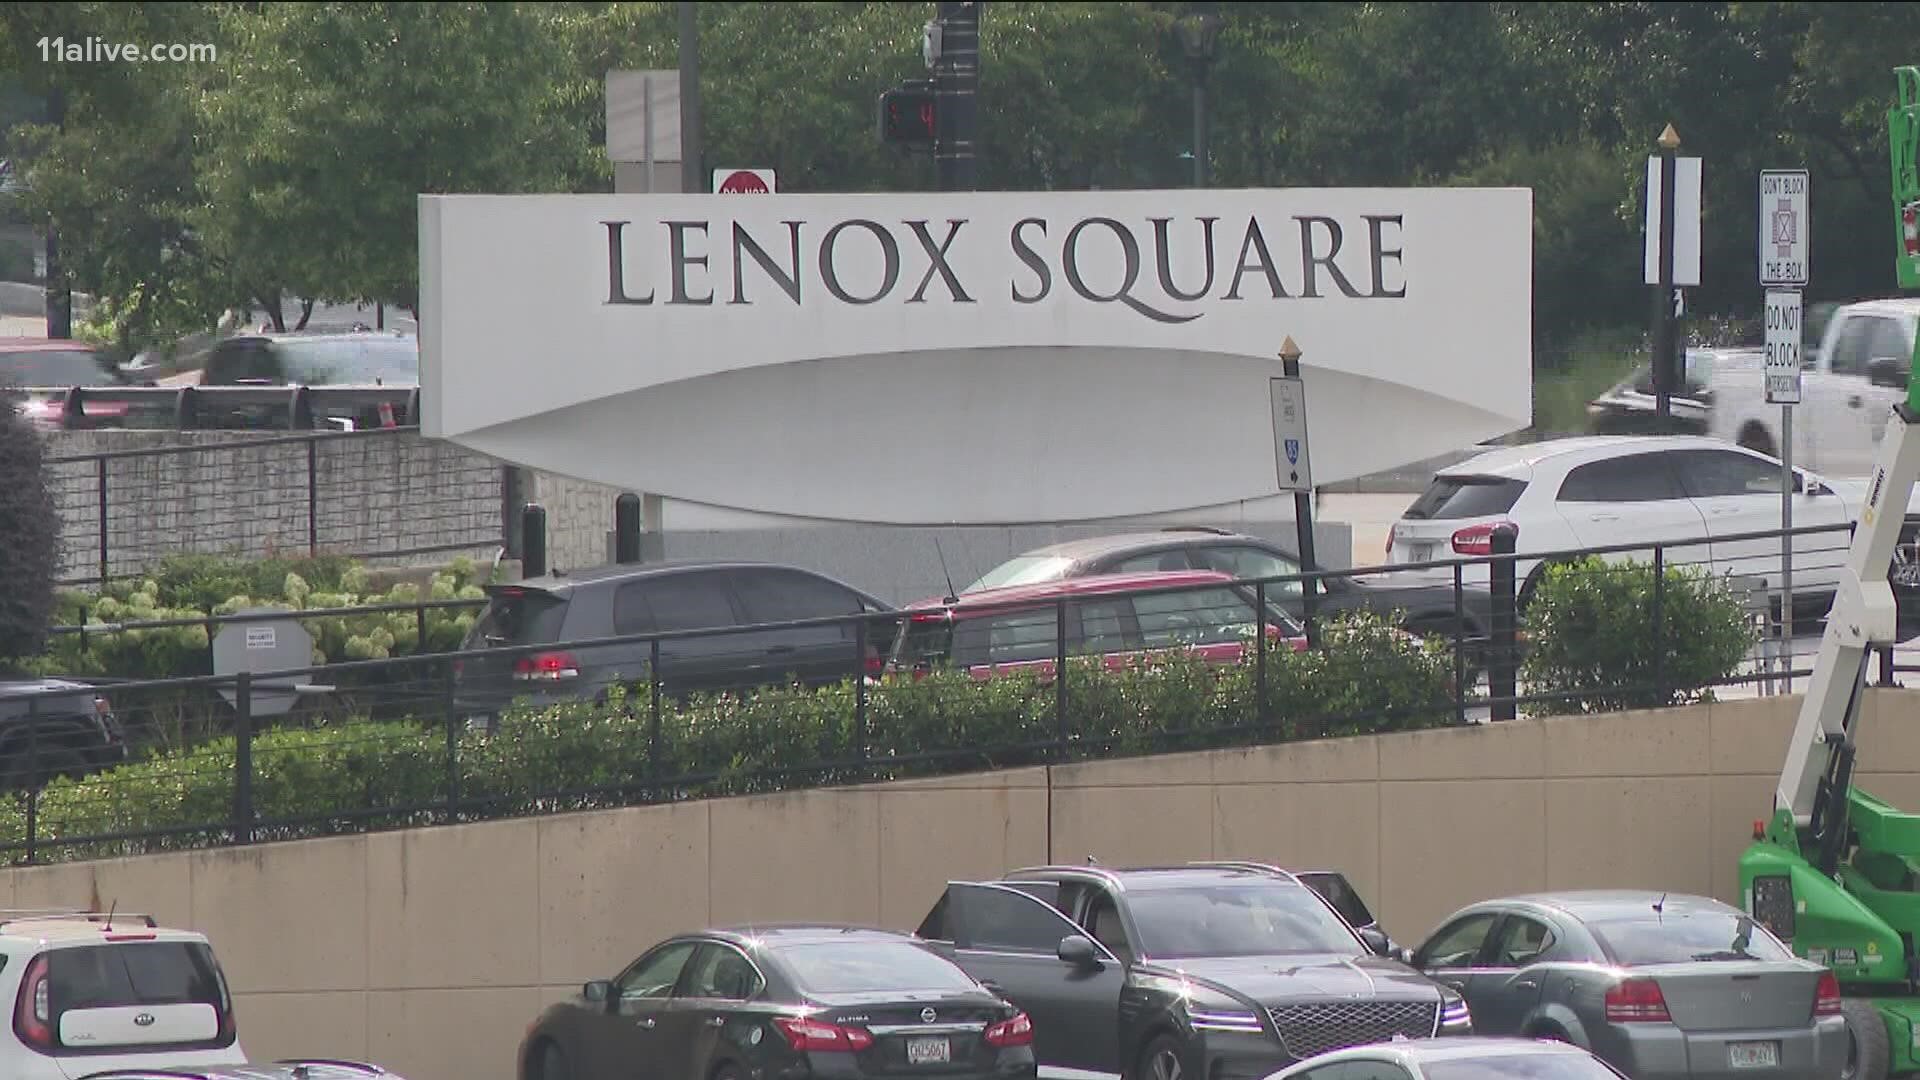 We take a look into the safety at one of Atlanta's most popular shopping centers.